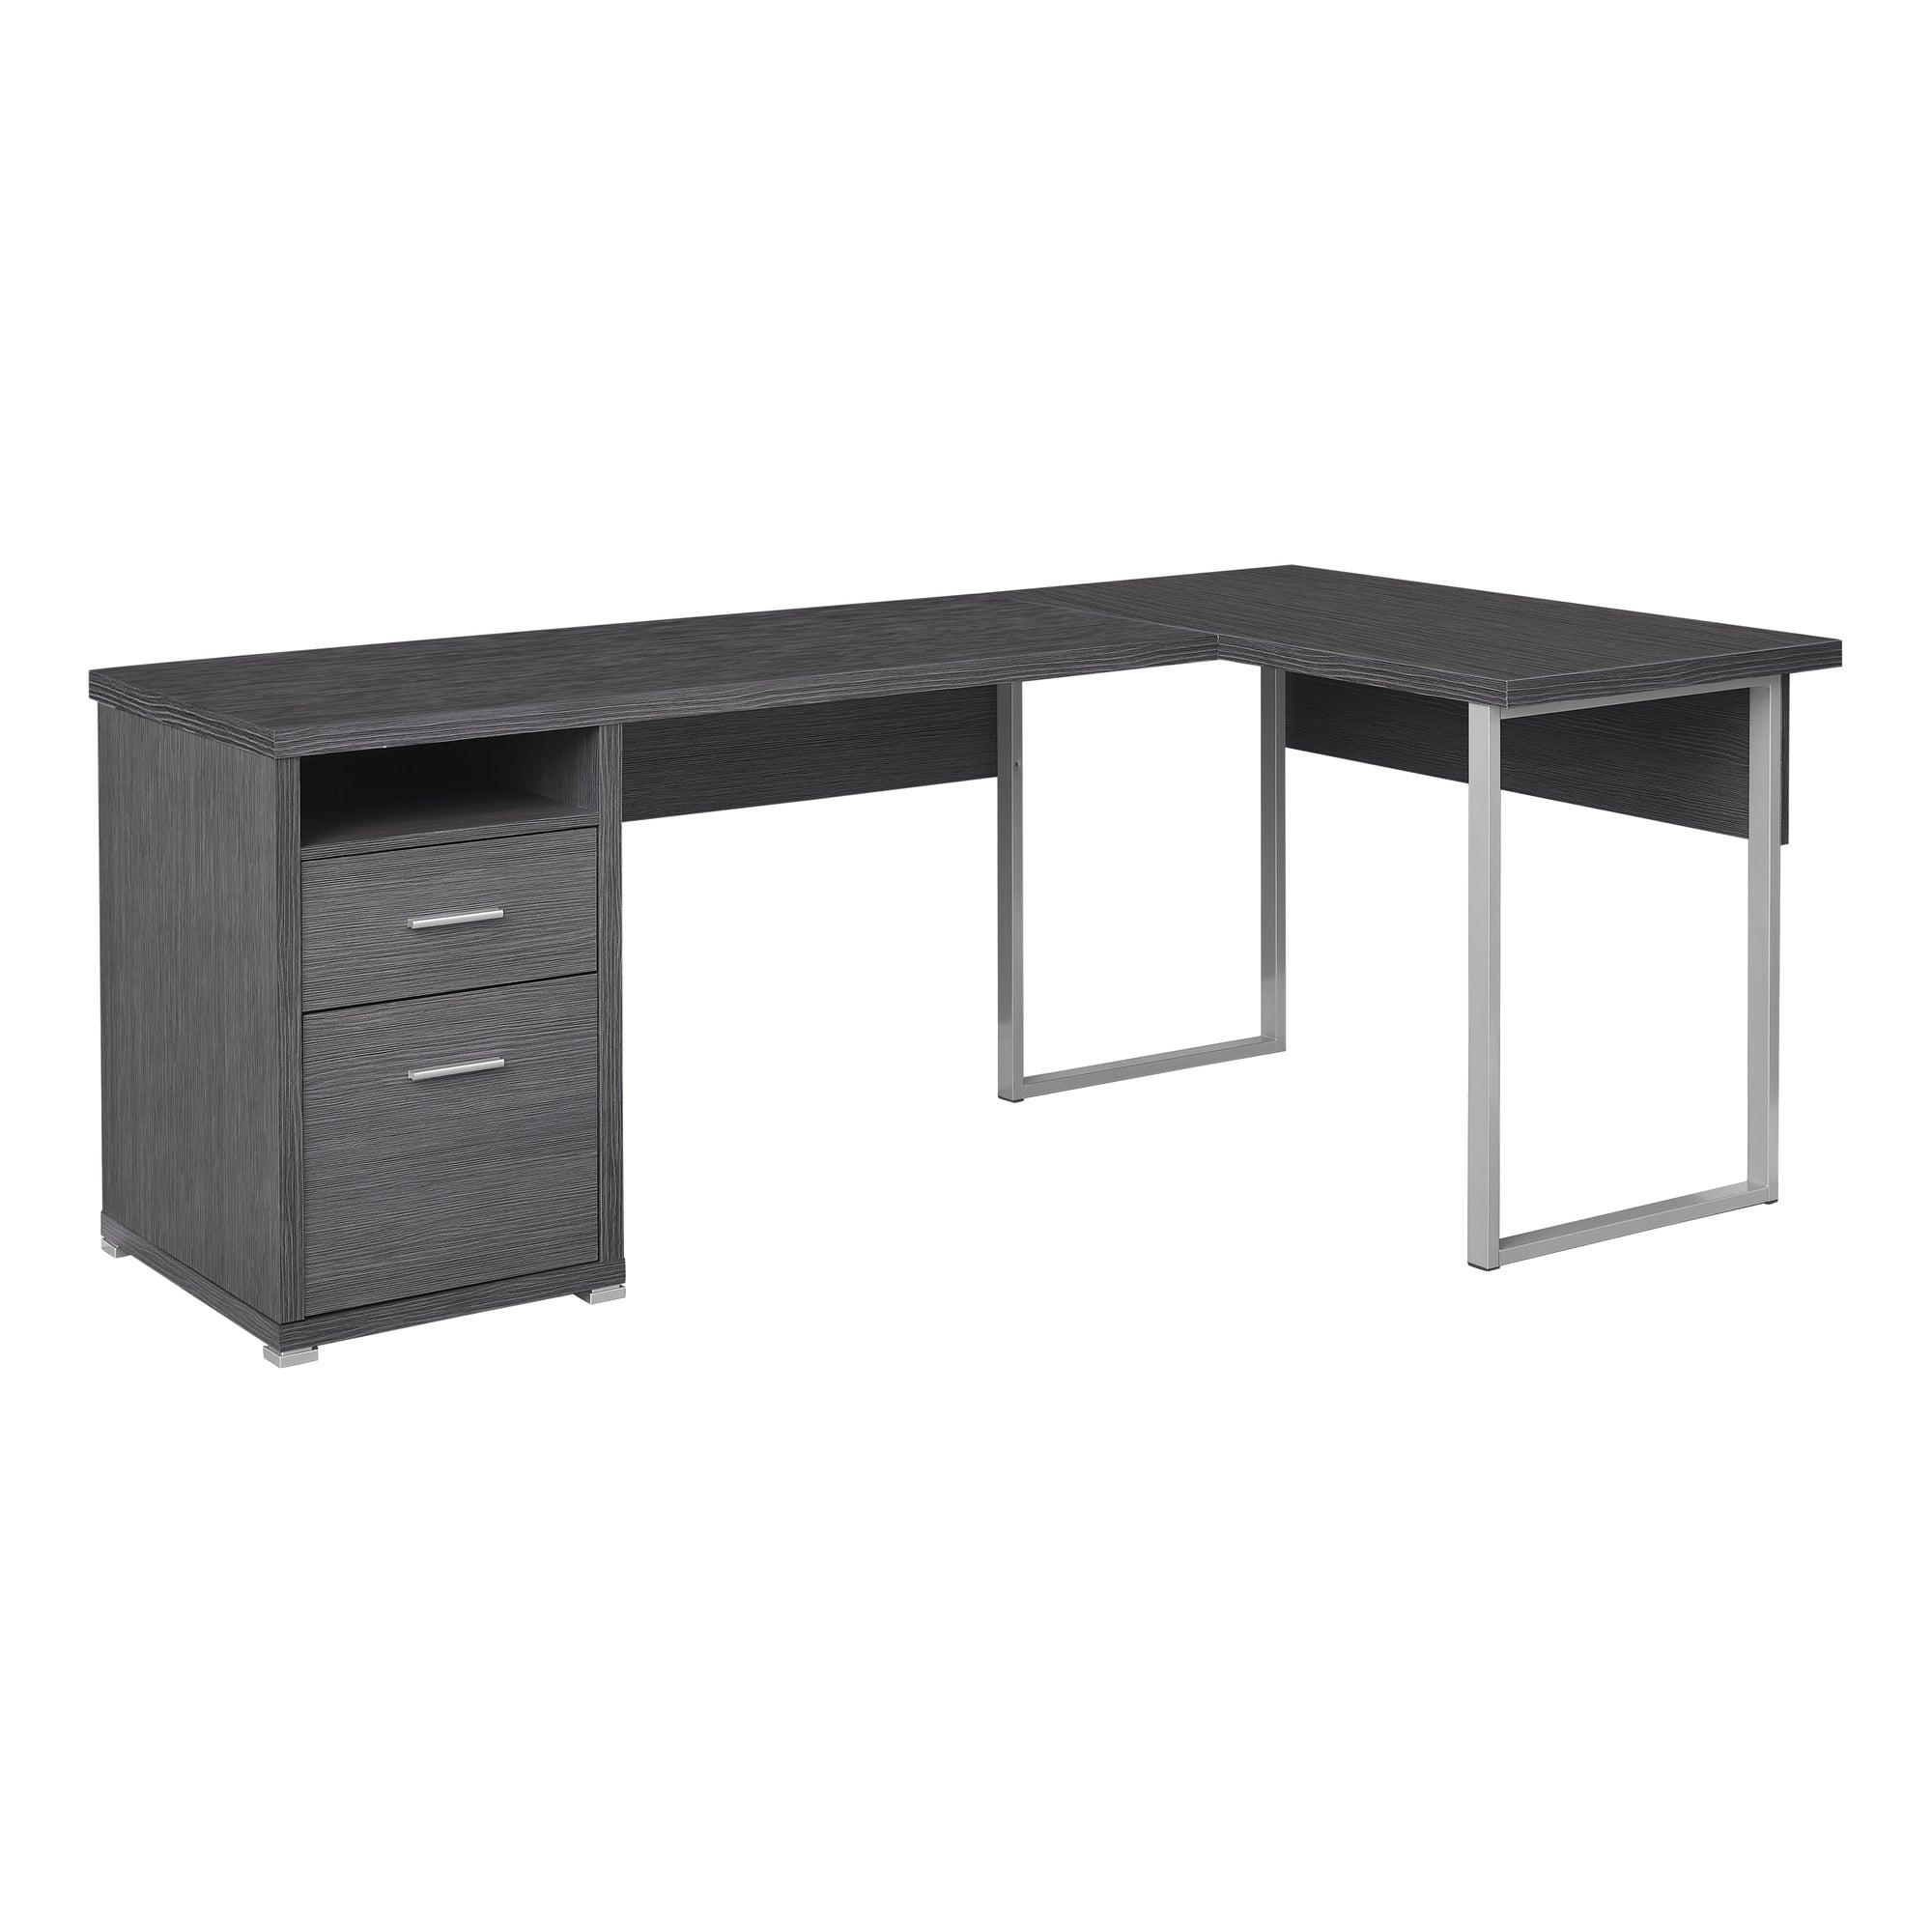 MN-717257    Computer Desk, Home Office, Corner, Left, Right Set-Up, Storage Drawers, 80"L, L Shape, Metal, Laminate, Grey, Silver, Contemporary, Modern